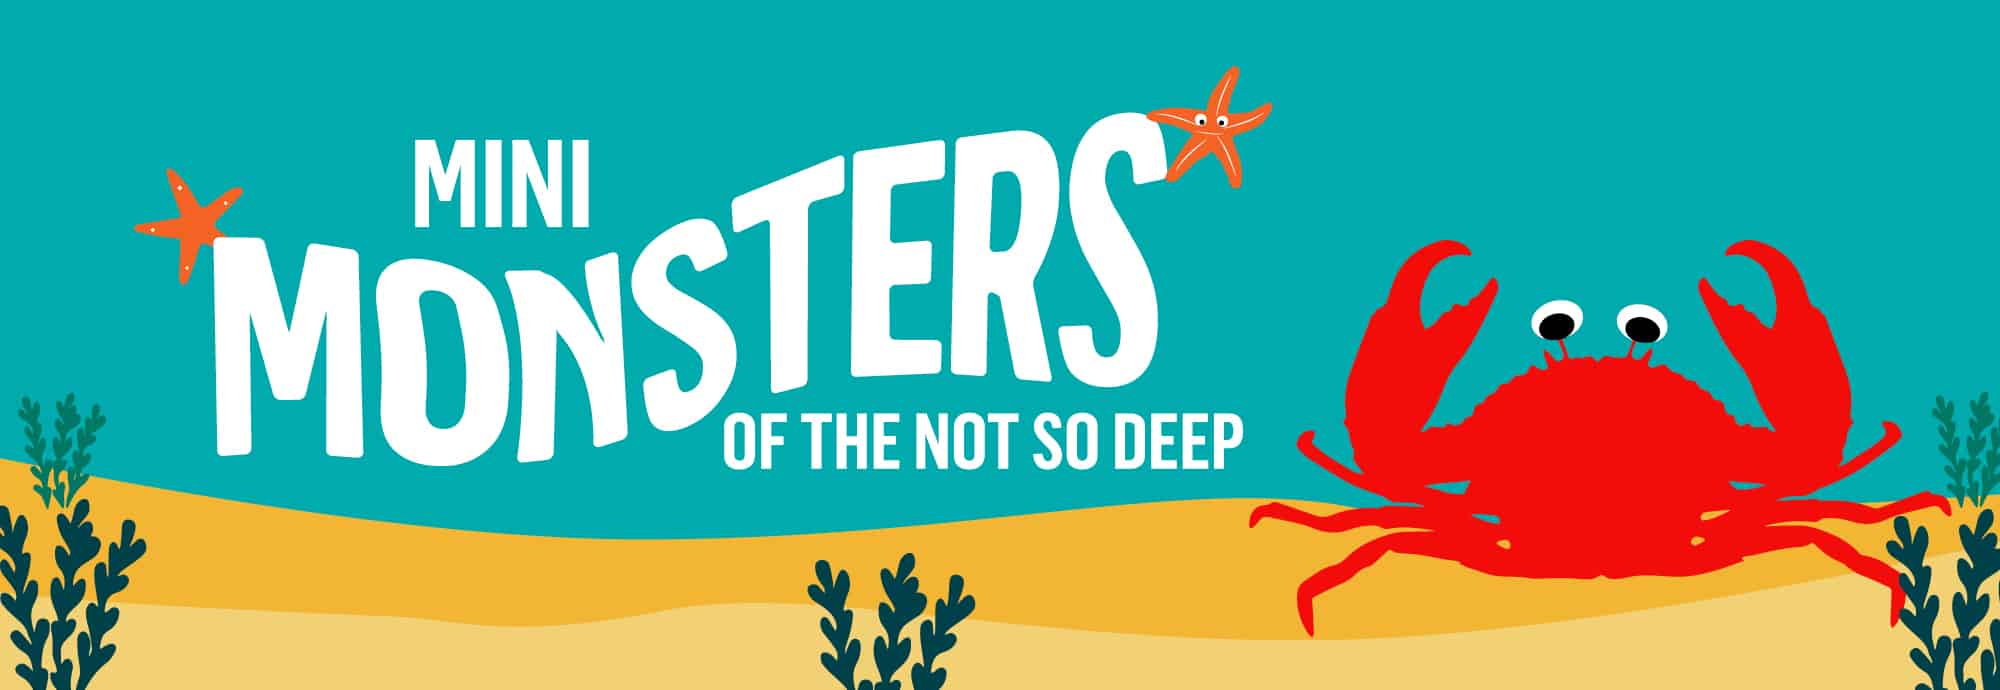 Mini Monsters of the Deep